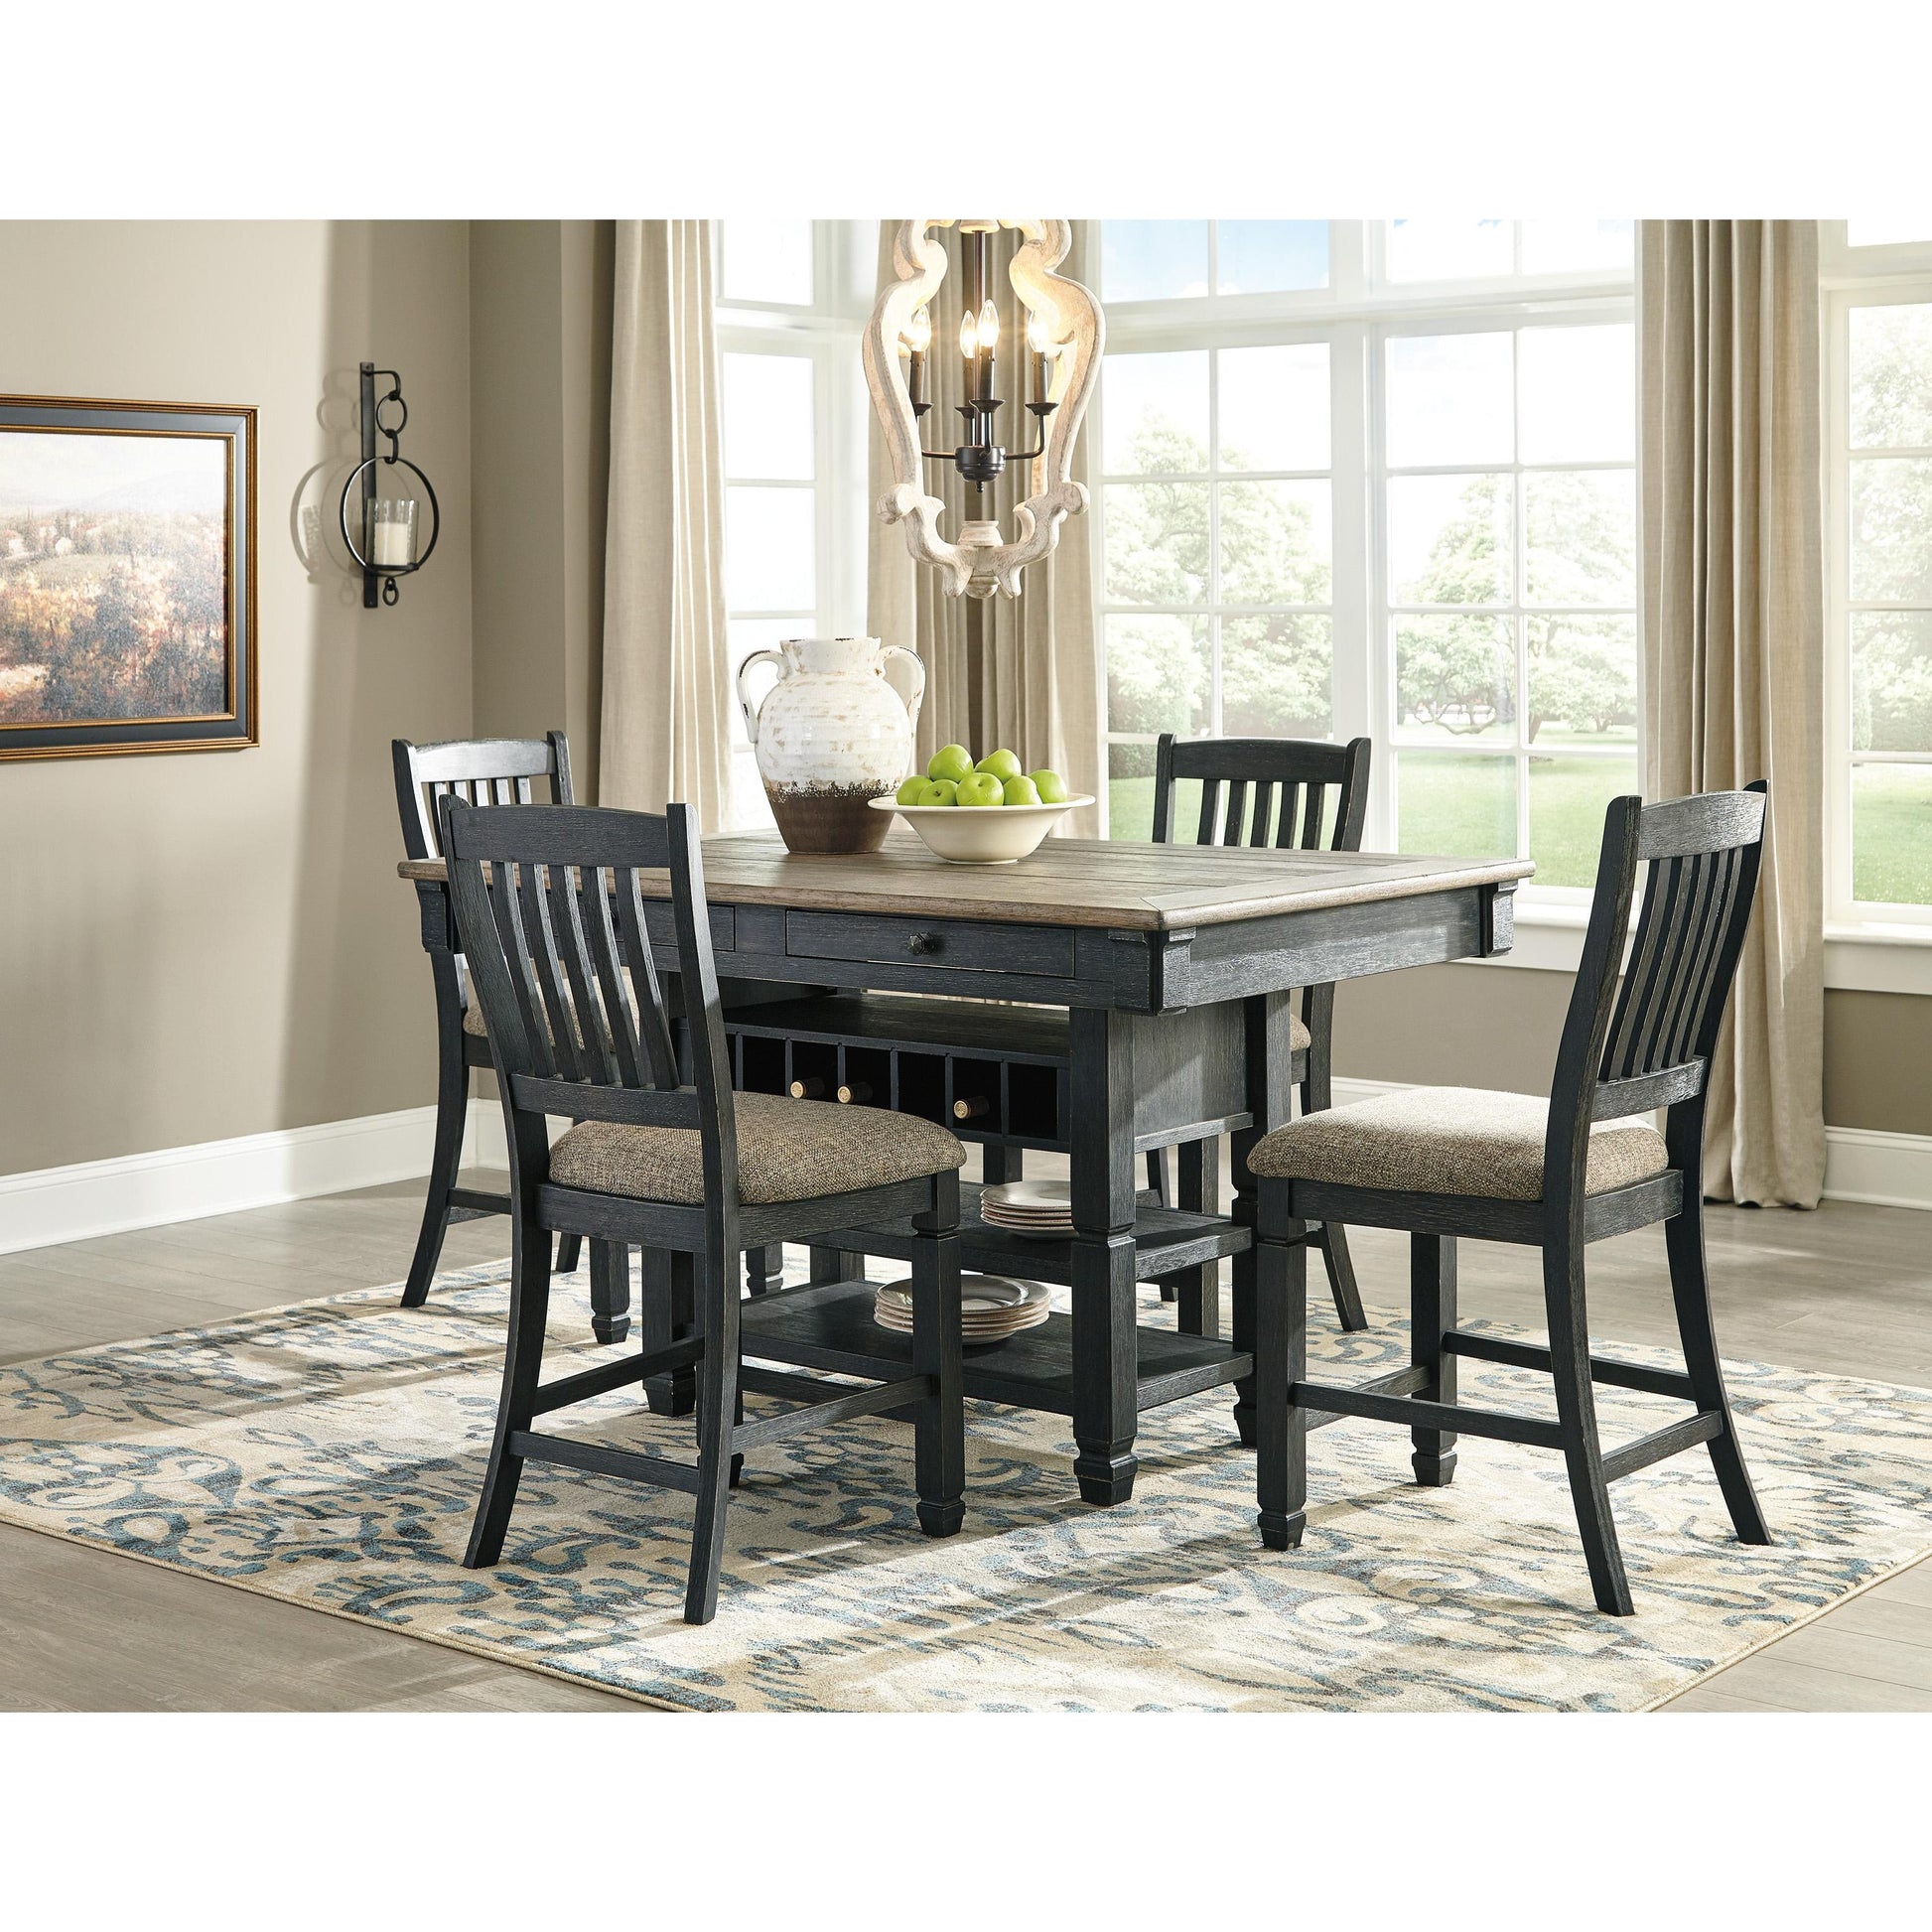 Signature Design by Ashley Tyler Creek D736D3 5 pc Counter Height Dining Set IMAGE 1